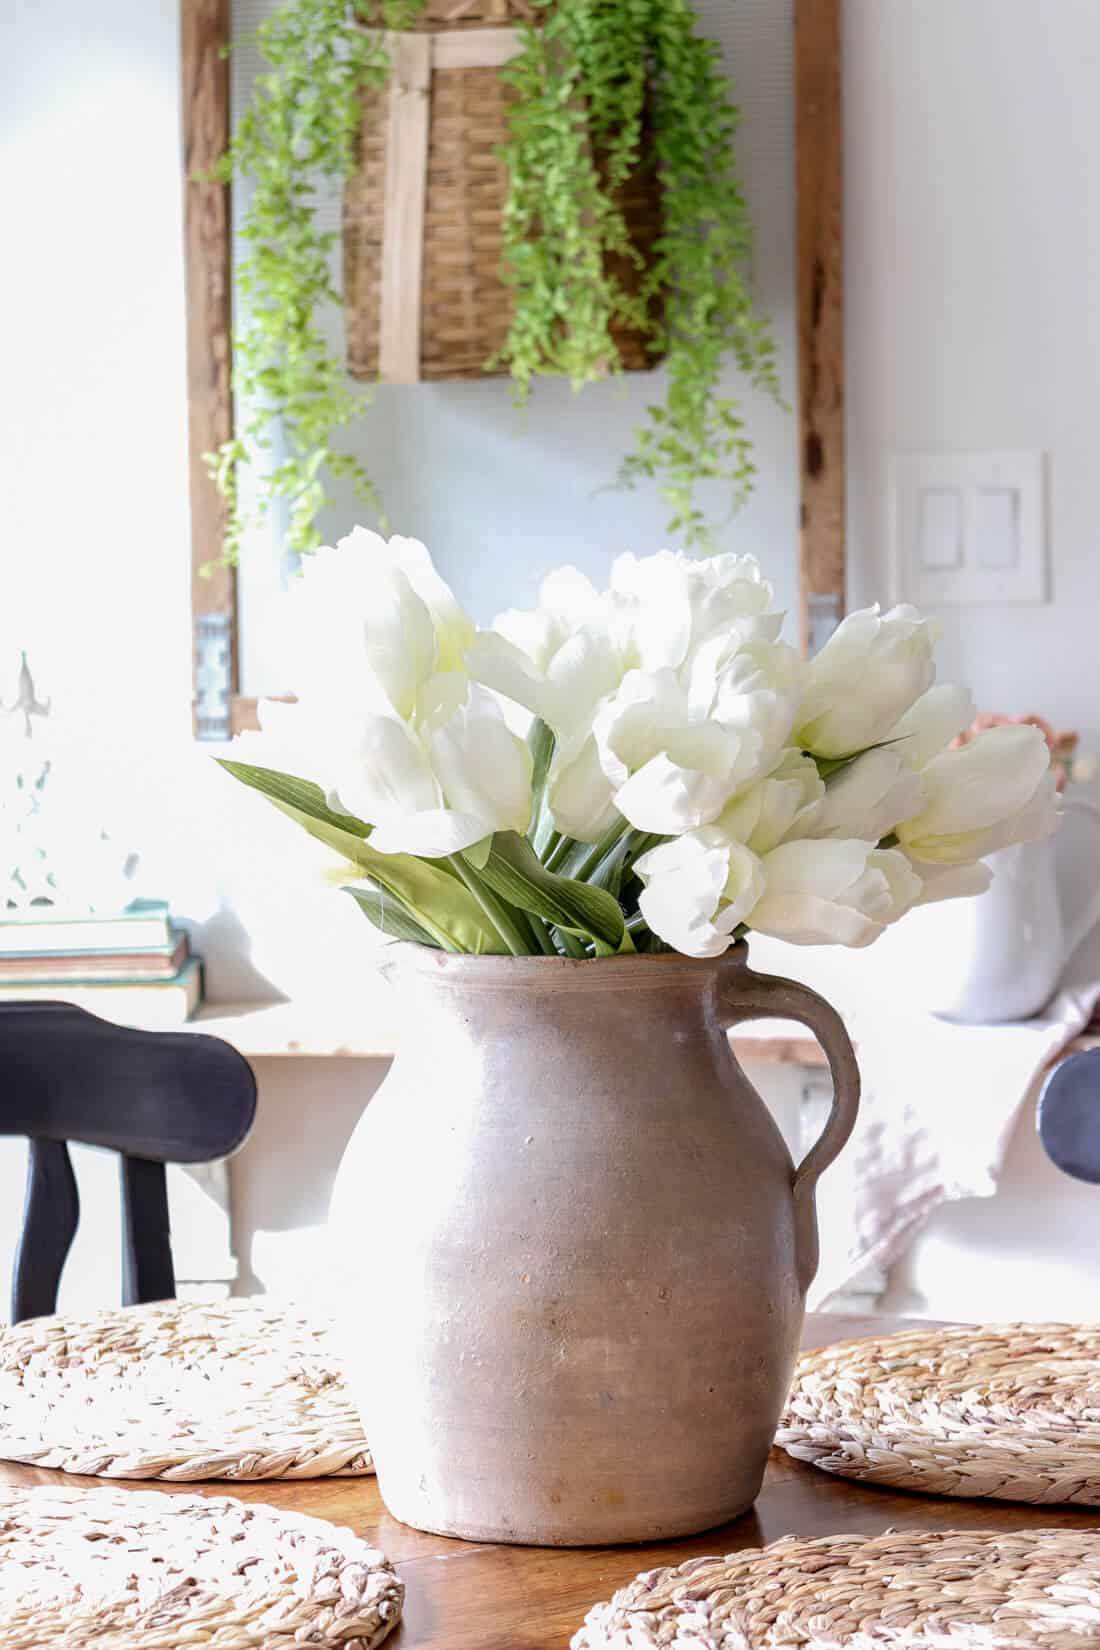 eat in kitchen with woven shades and clear hanging pendant light and a round table with black chairs. A vintage pottery vase is sitting on the table filled with tulips